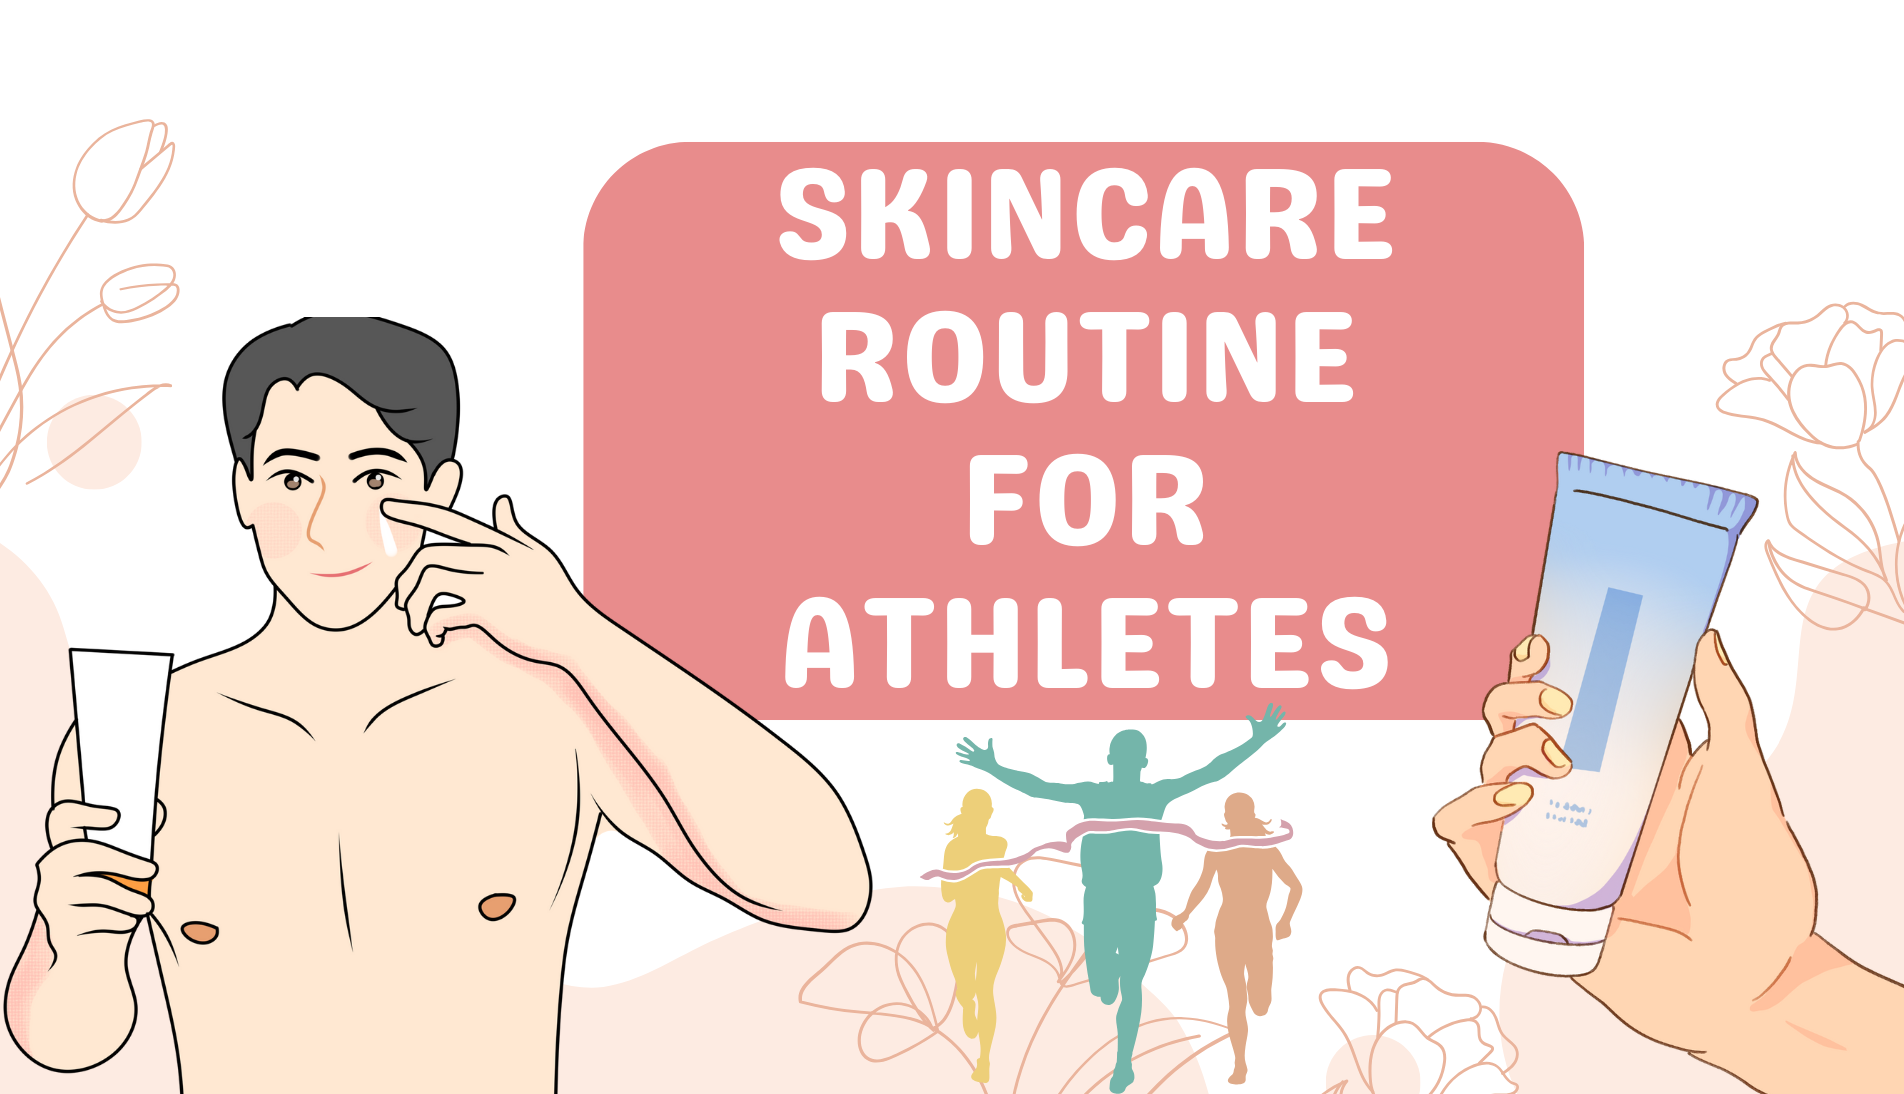 Illustration of a skincare routine for athletes.